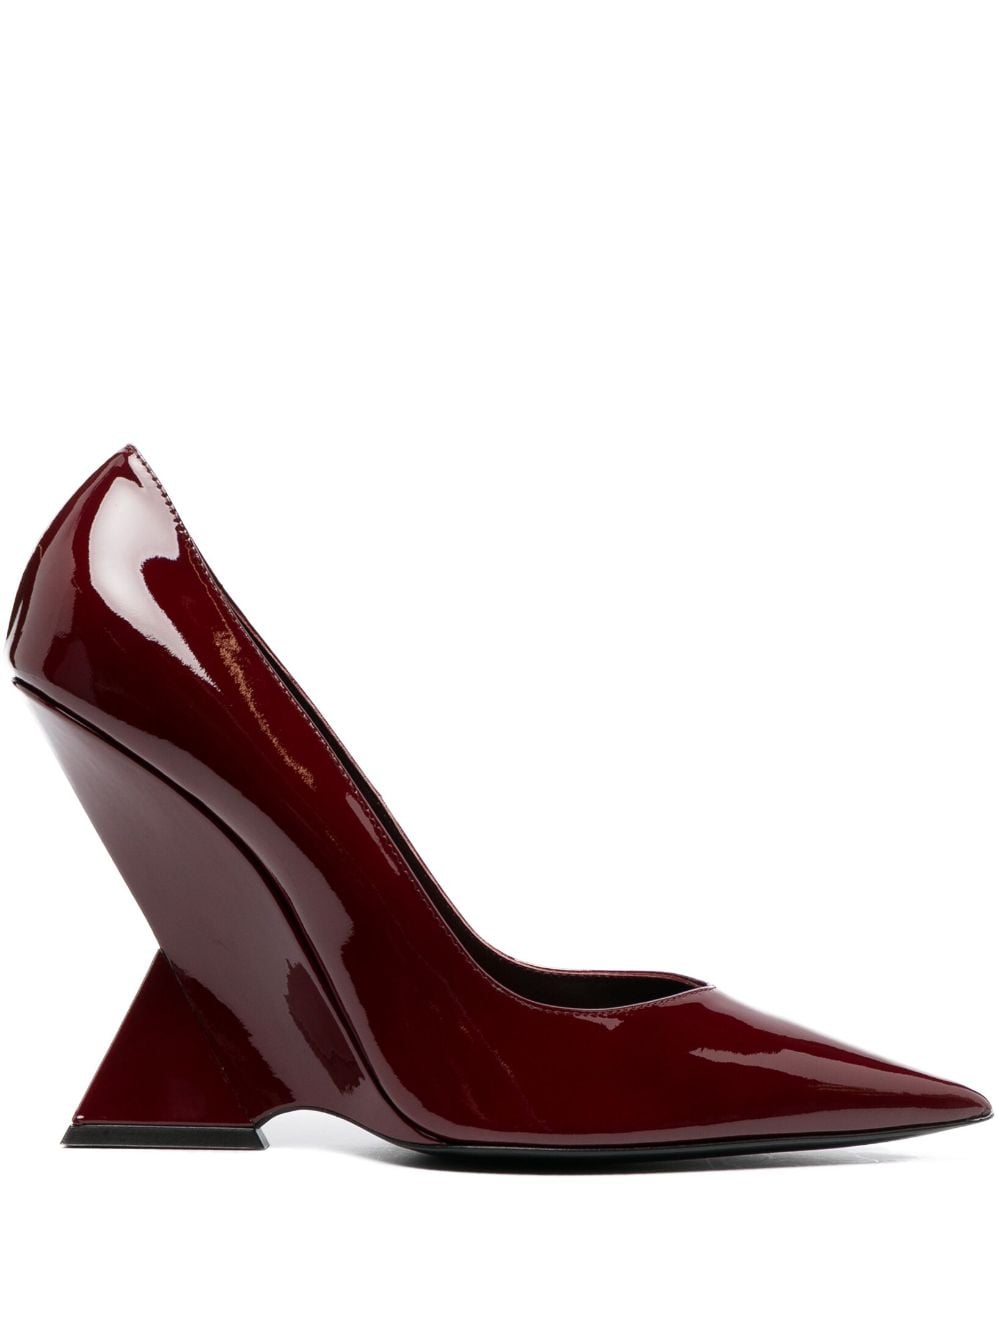 Attico Cheope Pyramid Wedge 105mm Pumps In Wine Red